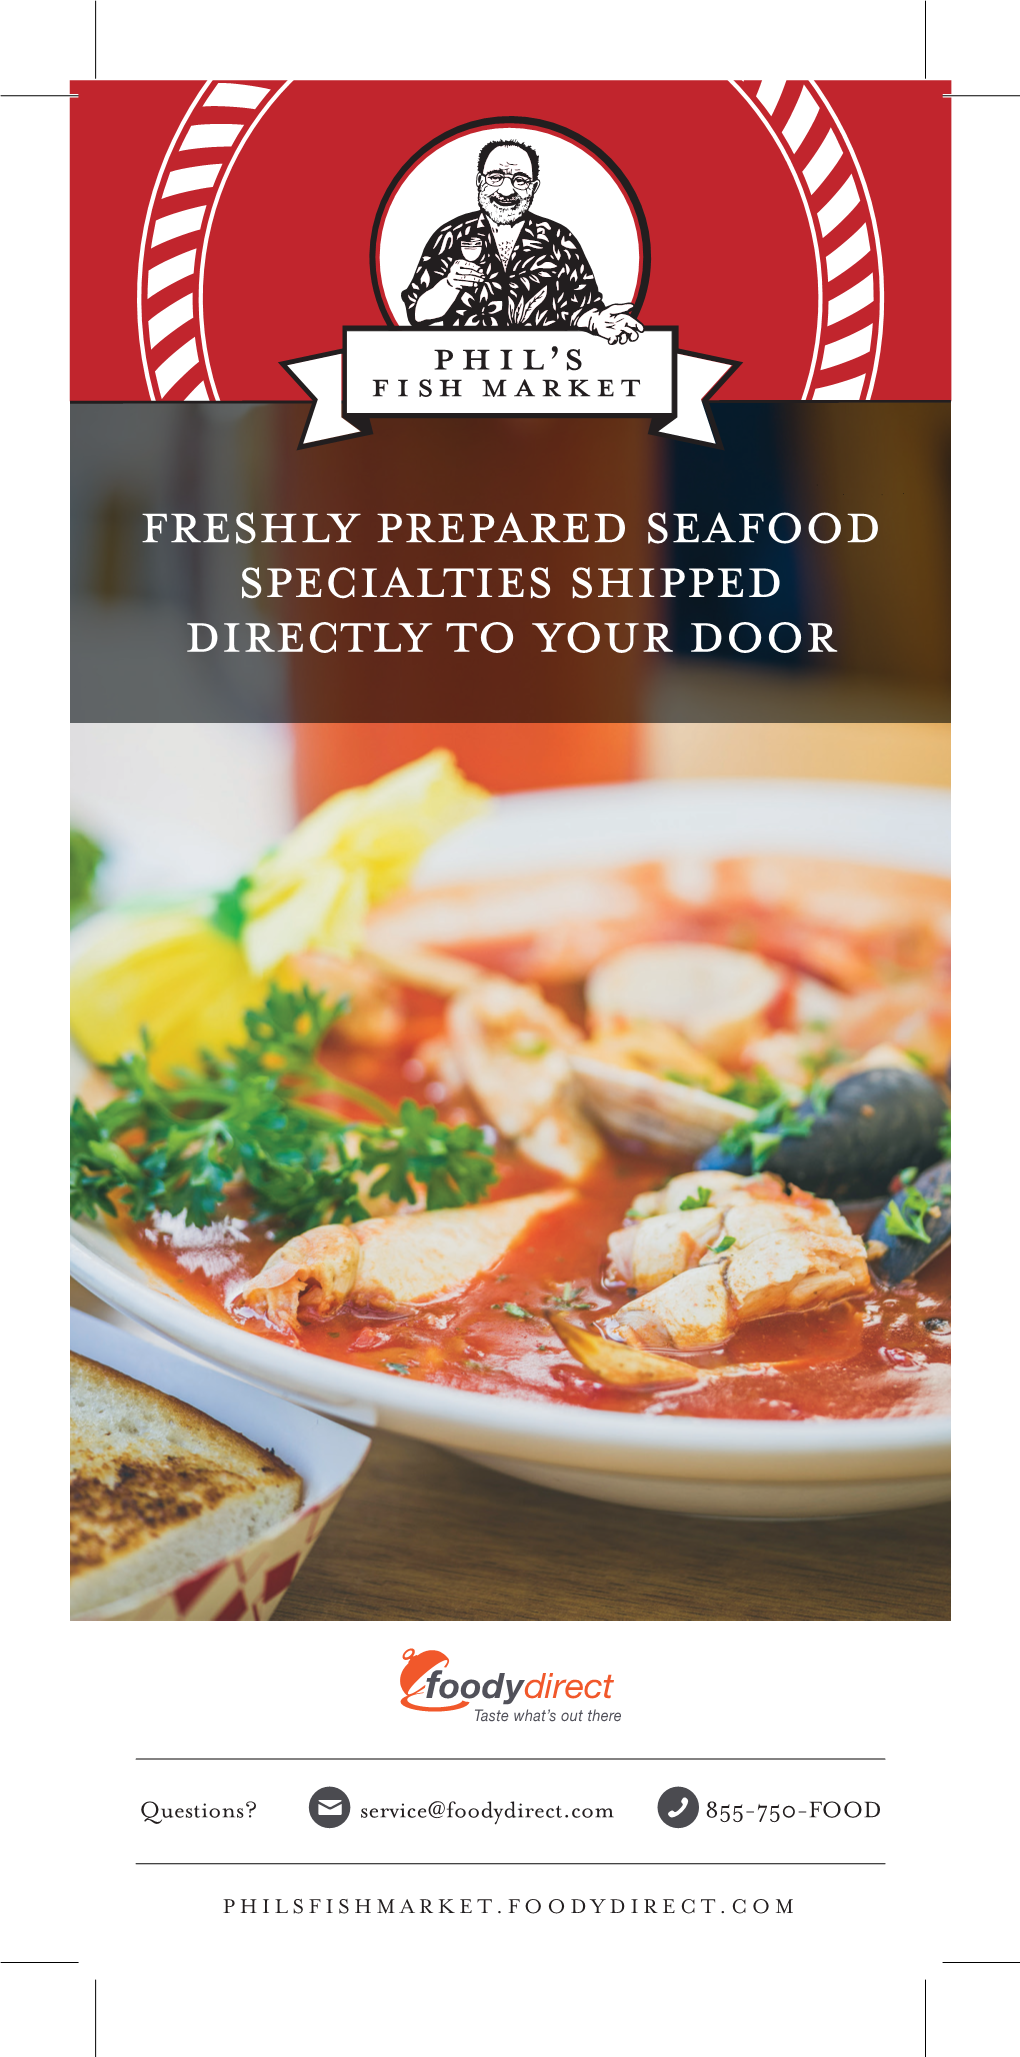 Freshly Prepared Seafood Specialties Shipped Directly to Your Door